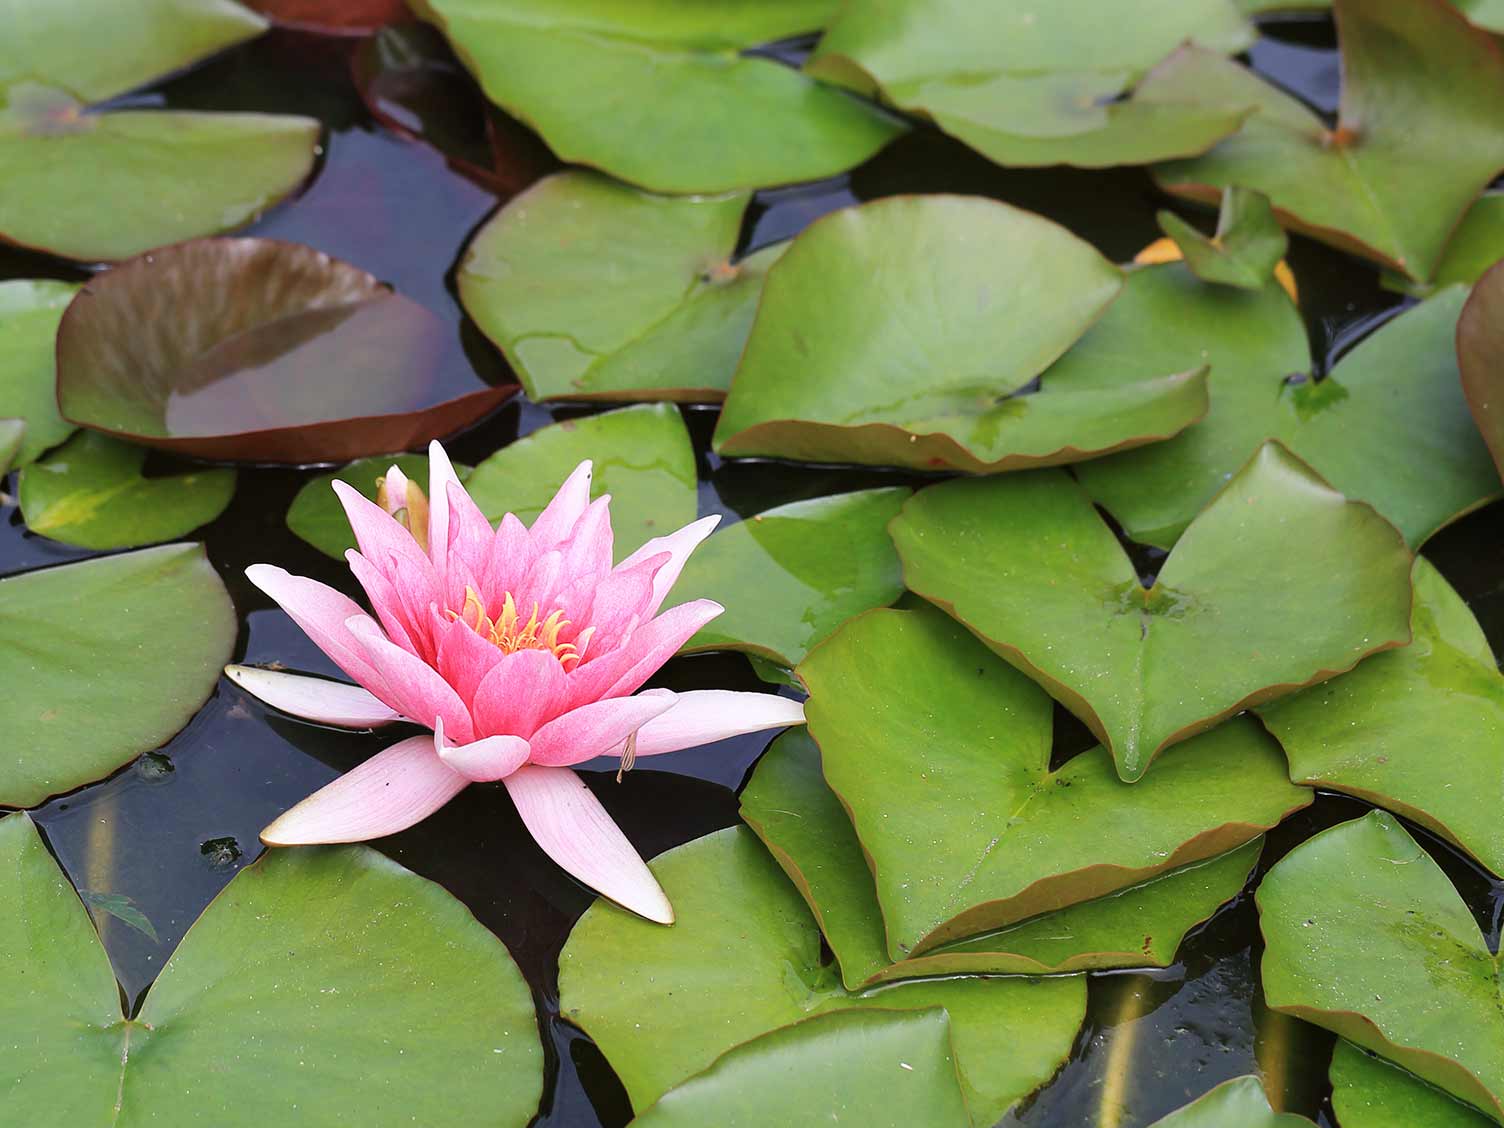 Buy Water Lily (Any Color) - Plant online from Nurserylive at lowest price.